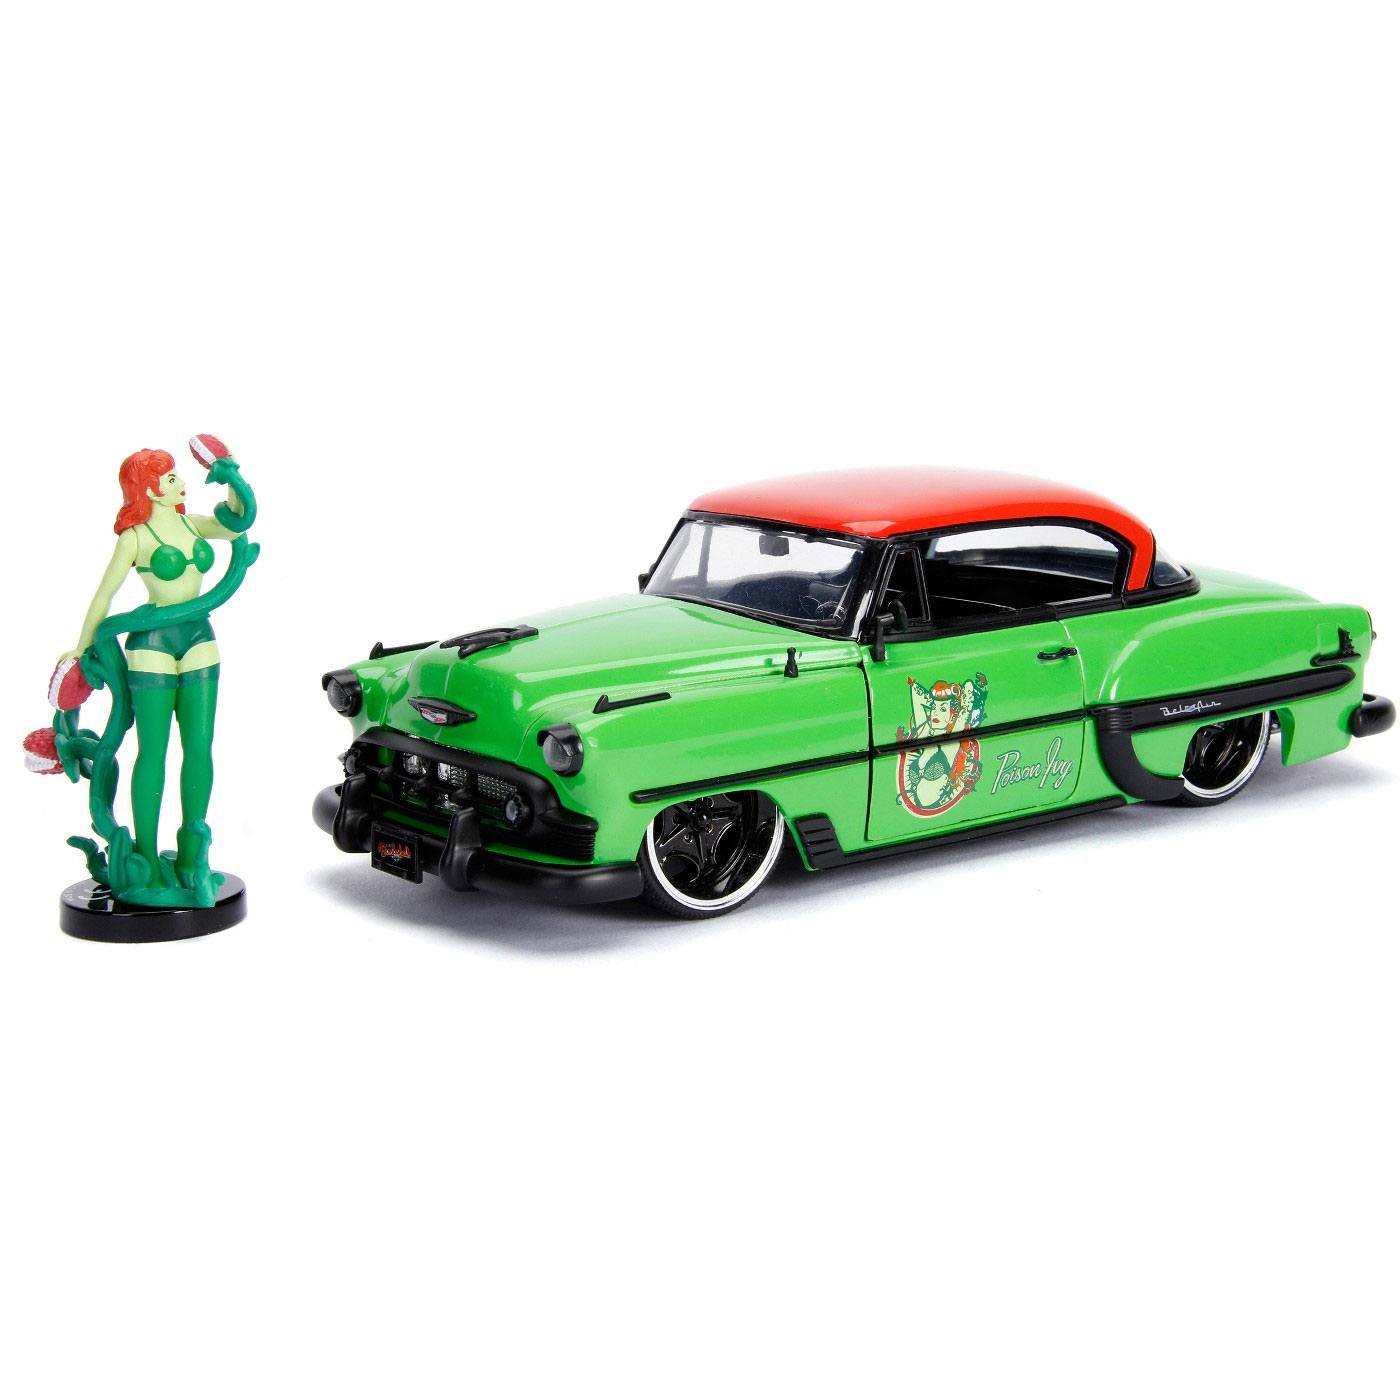 DC Bombshells Hollywood Rides 1/24 1953 Chevy Bel Air Hard Top mtal avec figurine Poison Ivy